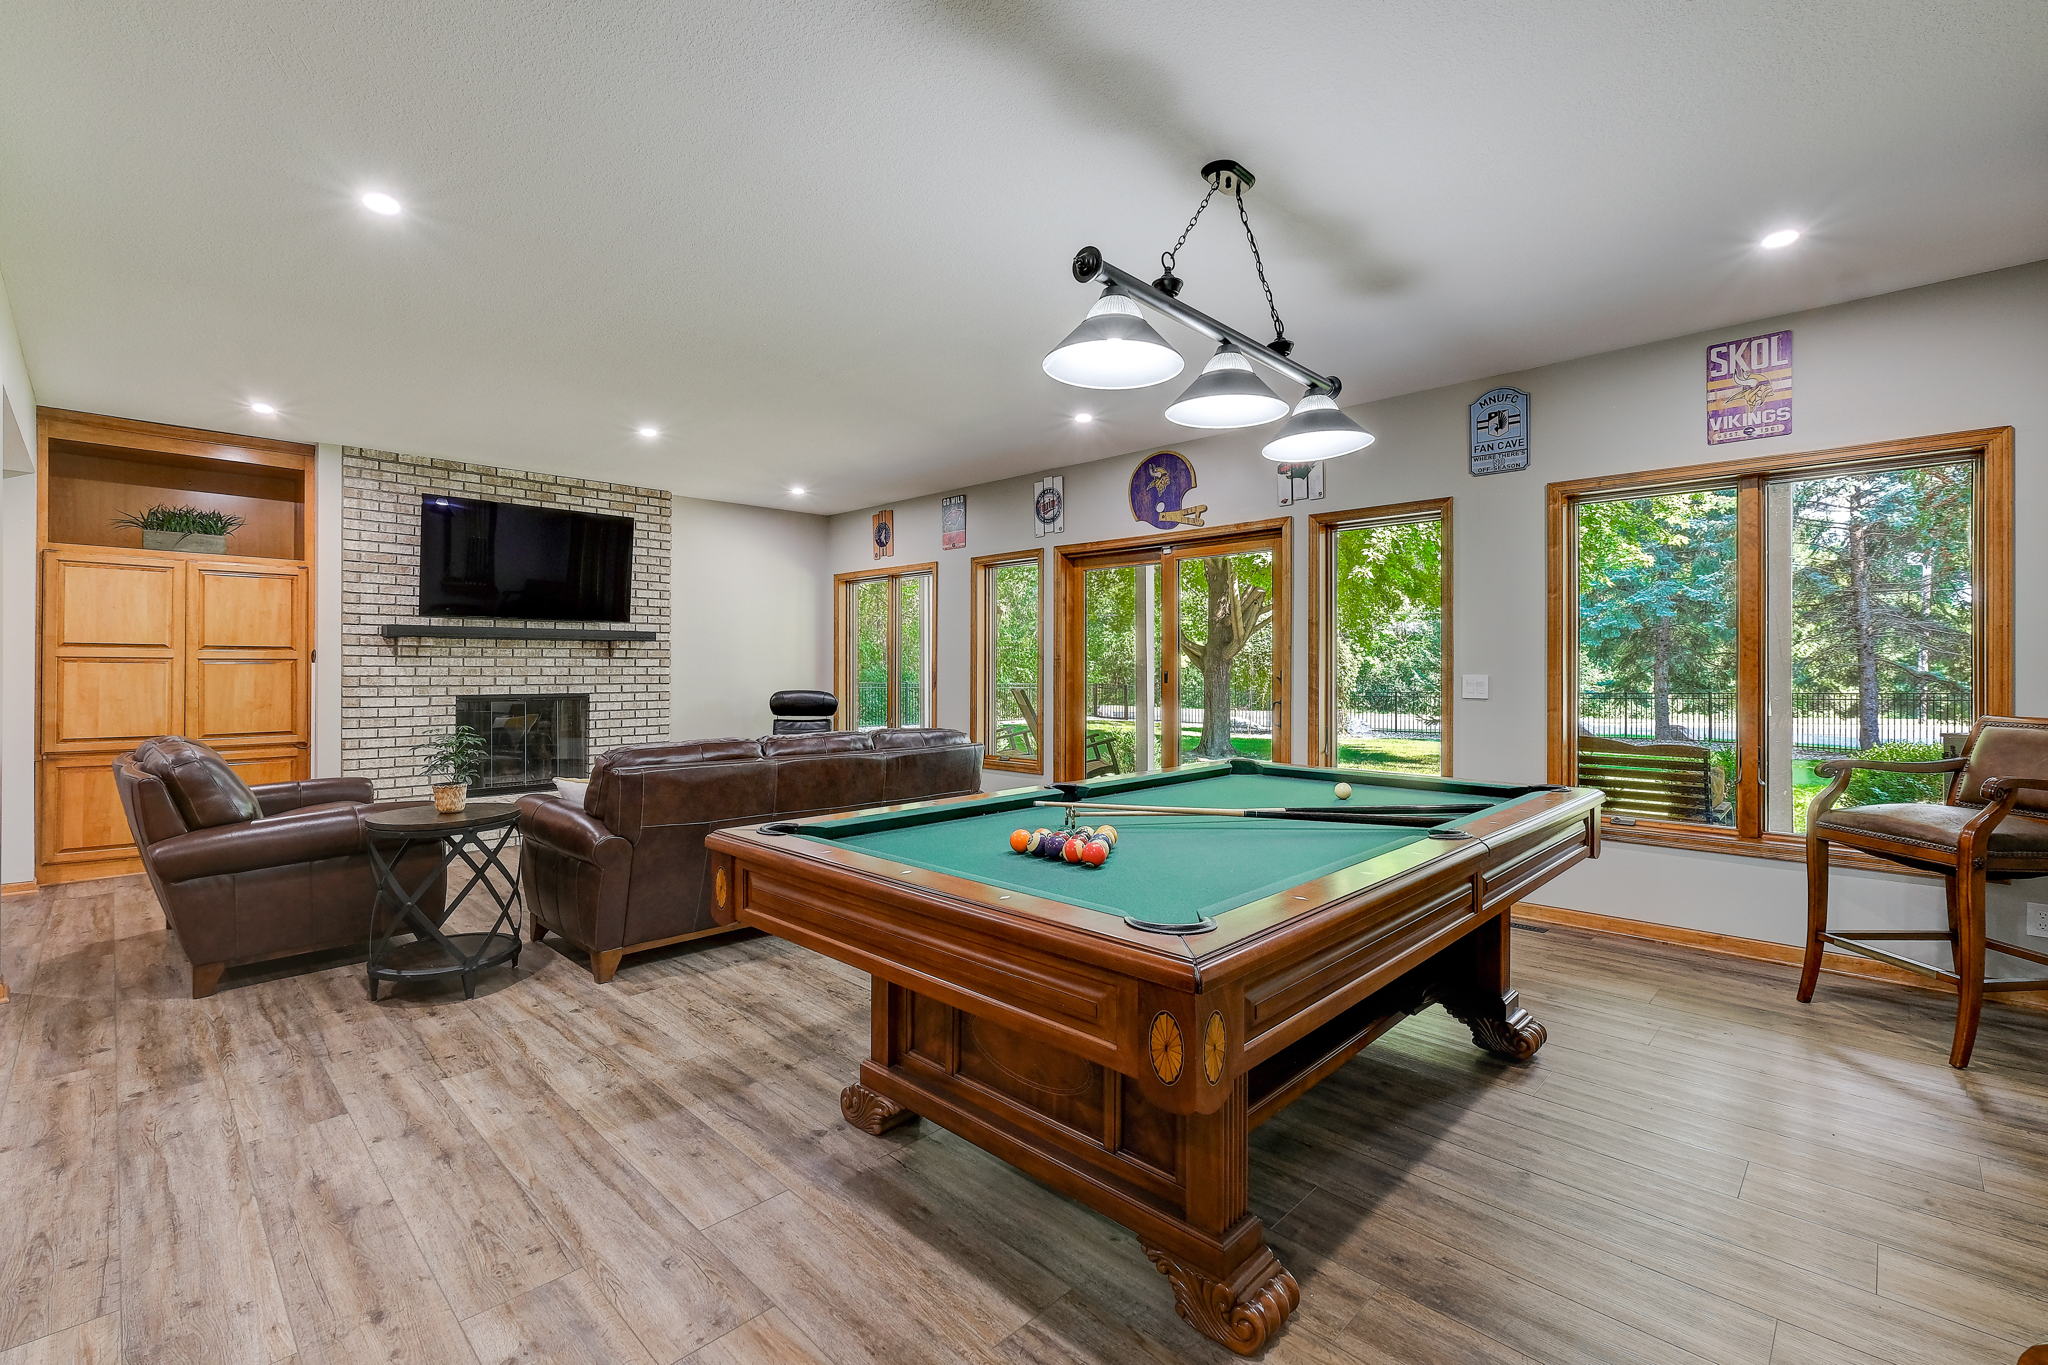 Game room has full kitchen and walk out to protected patio area